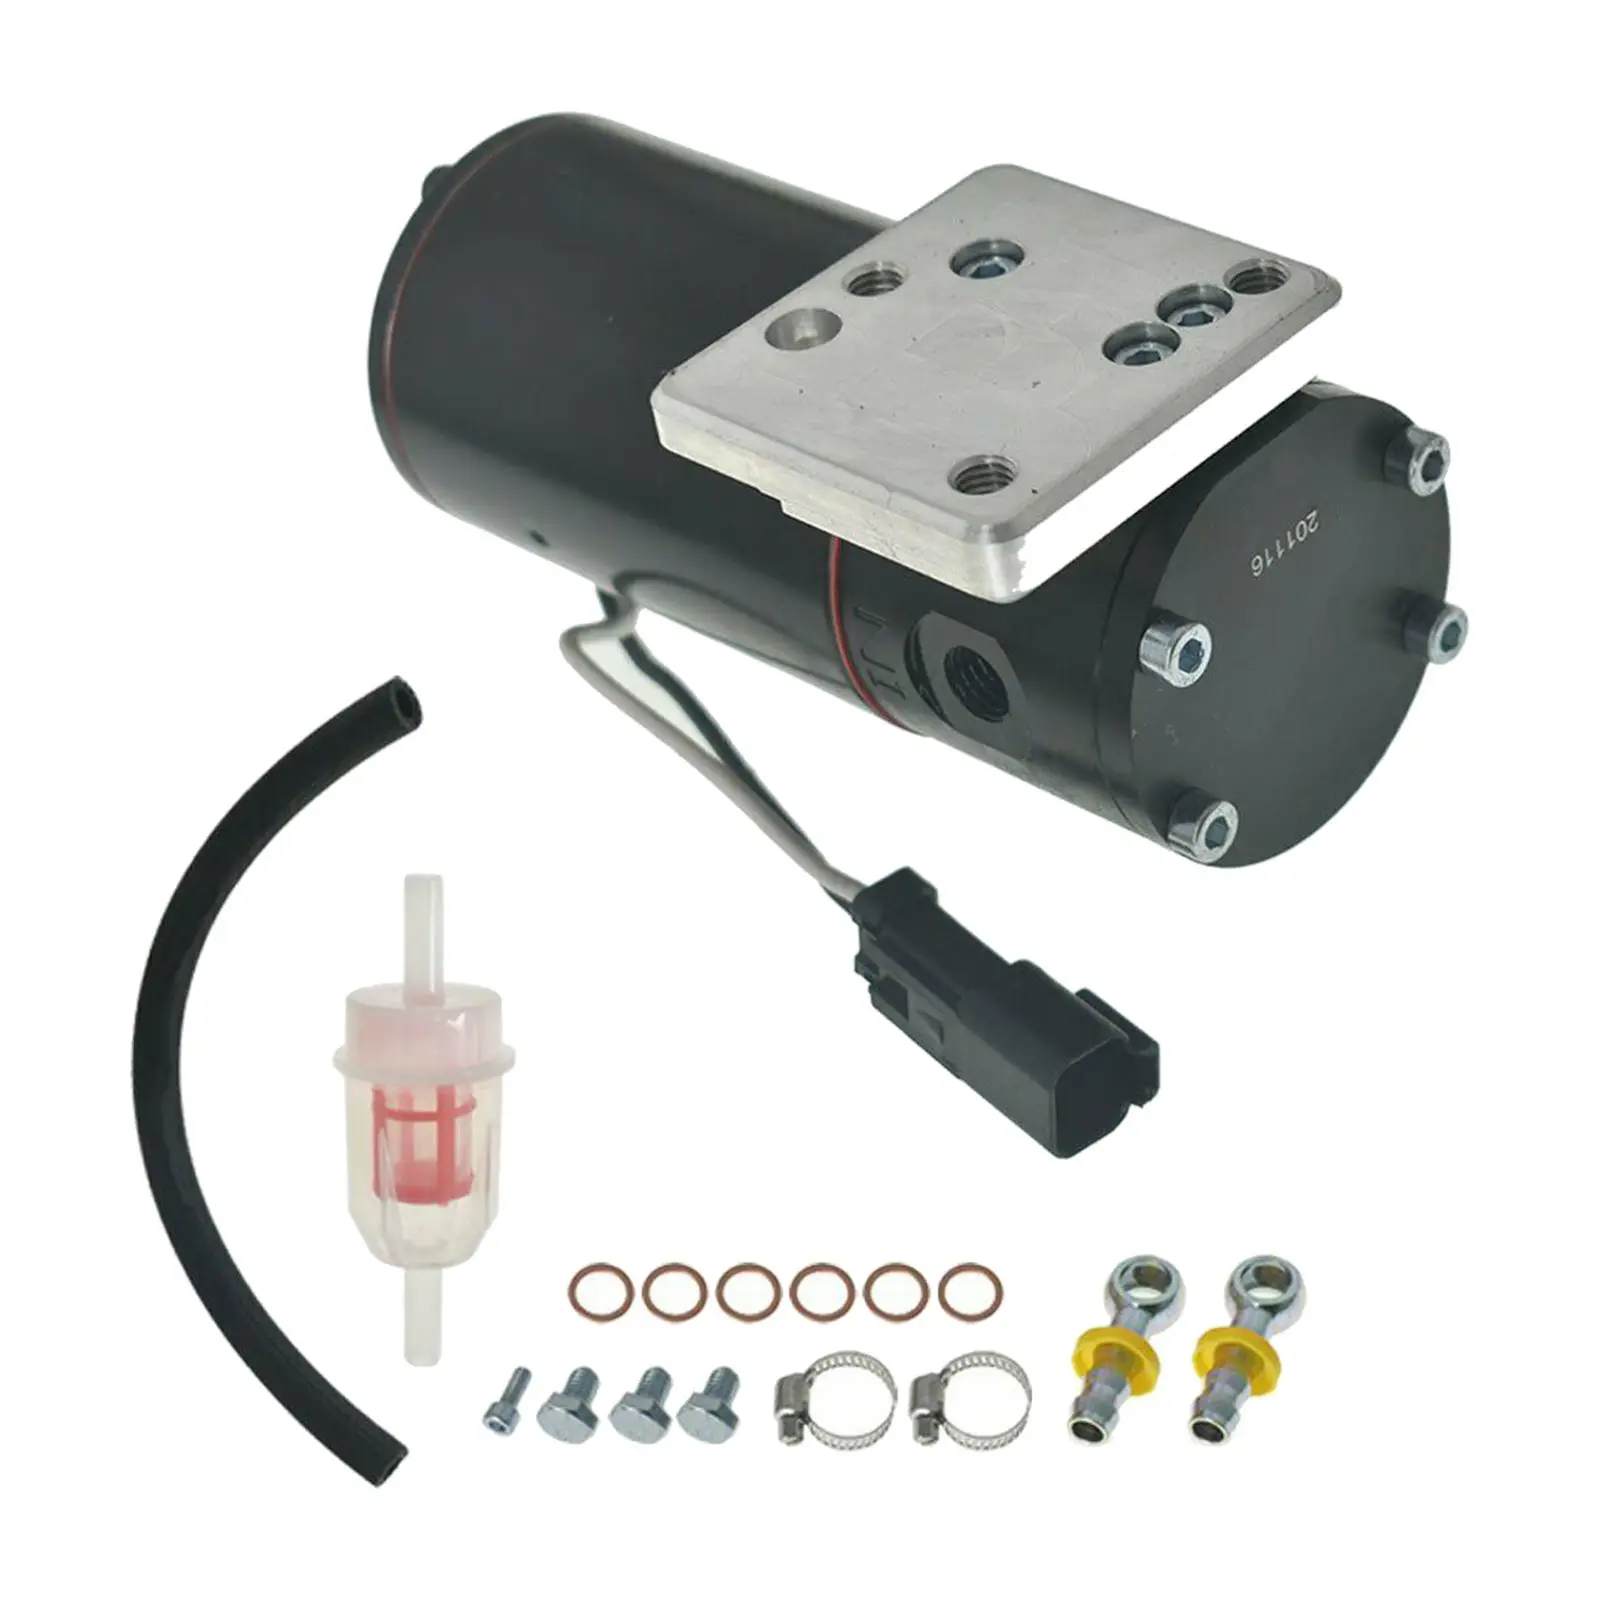 Fuel Lift Pump Kit DRP02 fits for Ram 2500 3500 1998.5-2002 High Performance